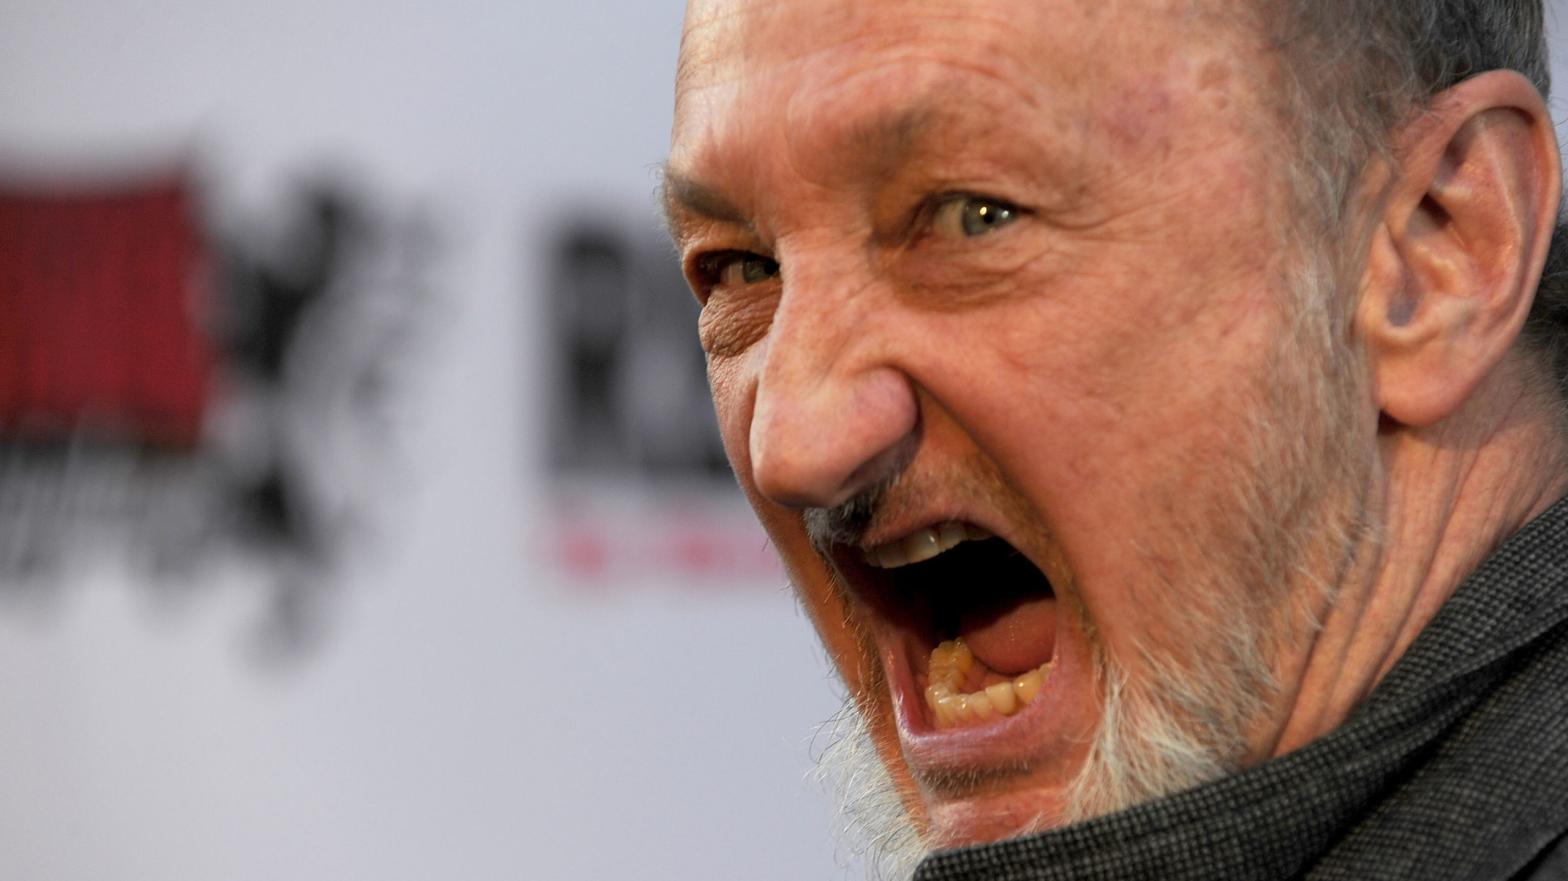 Robert Englund's red-carpet poses are exactly what you want them to be. (Photo: Frazer Harrison, Getty Images)